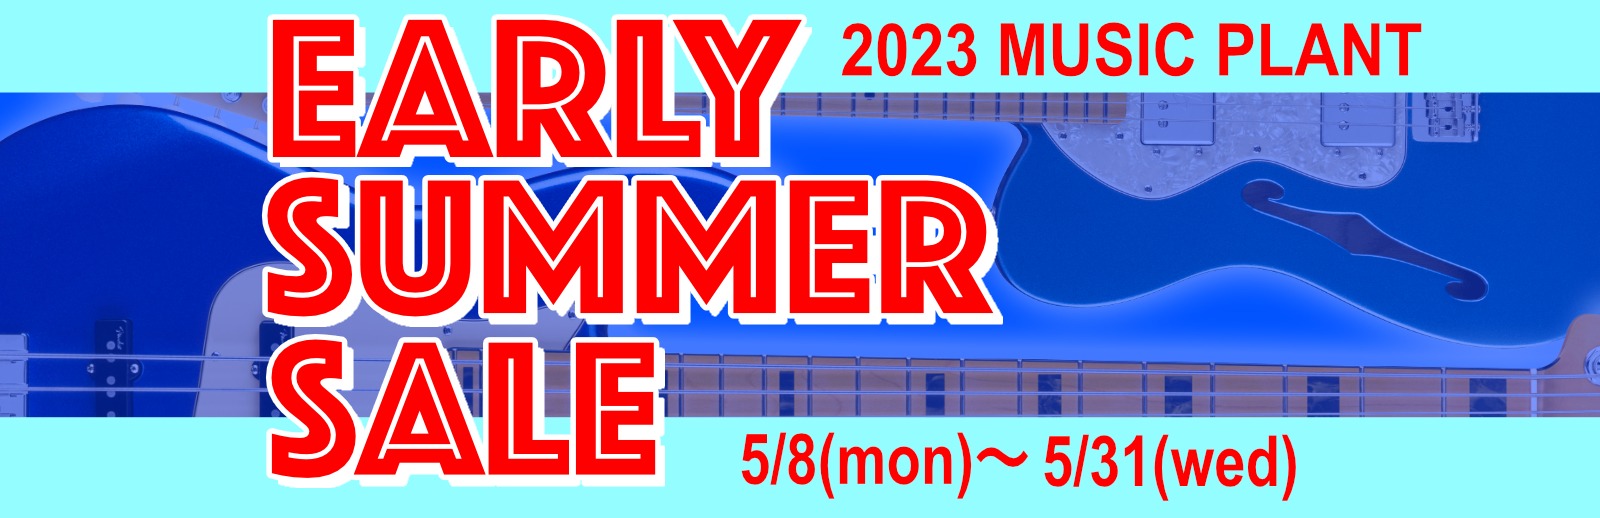 2023 MUSIC PLANT EARLY SUMMER SALE  5/8〜5/31